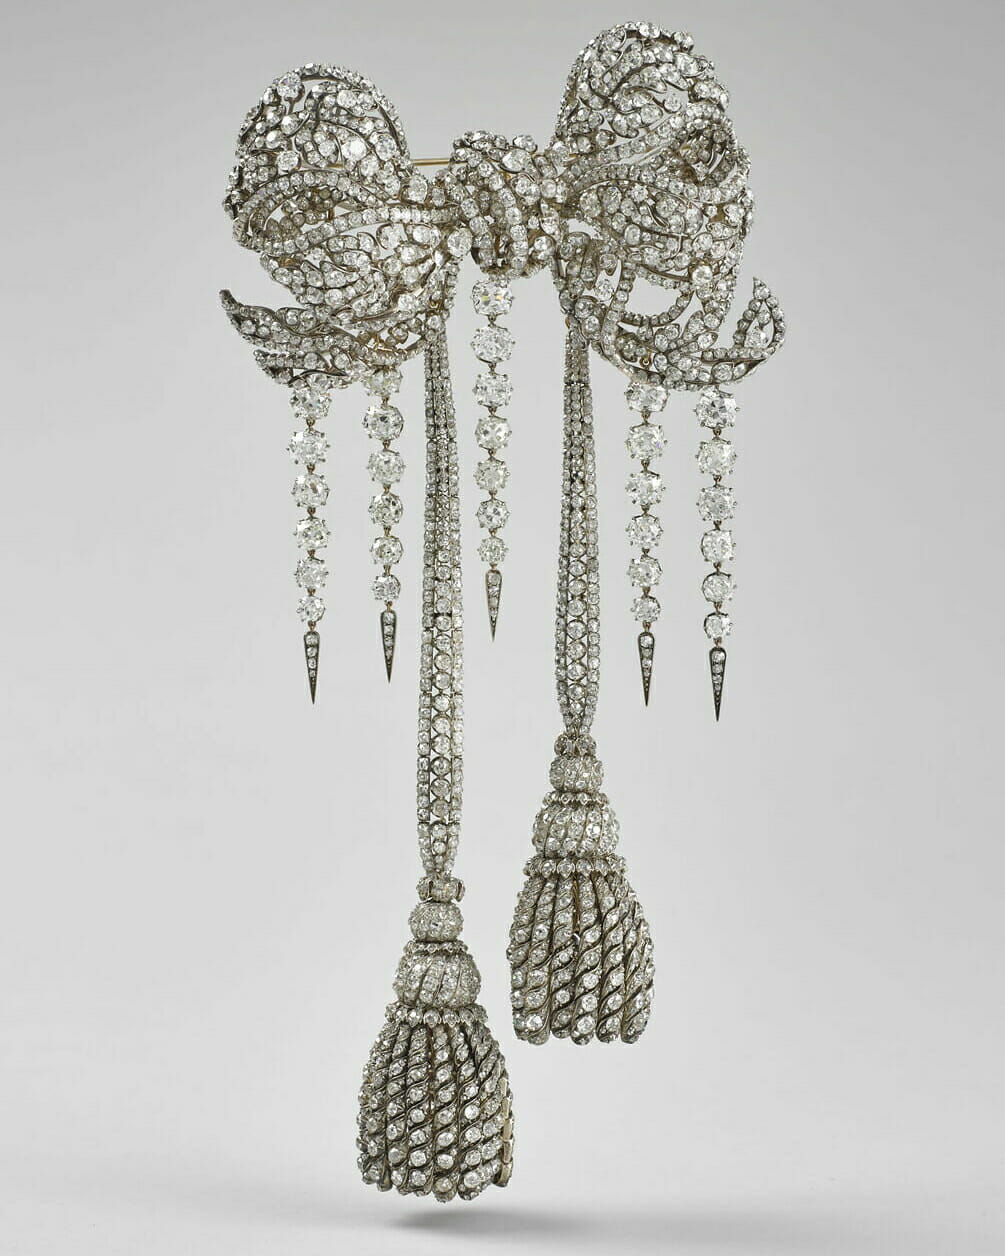 Marie Antoinette's Diamond Earrings Are the Focus of Today's Virtual Gem  Gallery Tour - N. Fox Jewelers